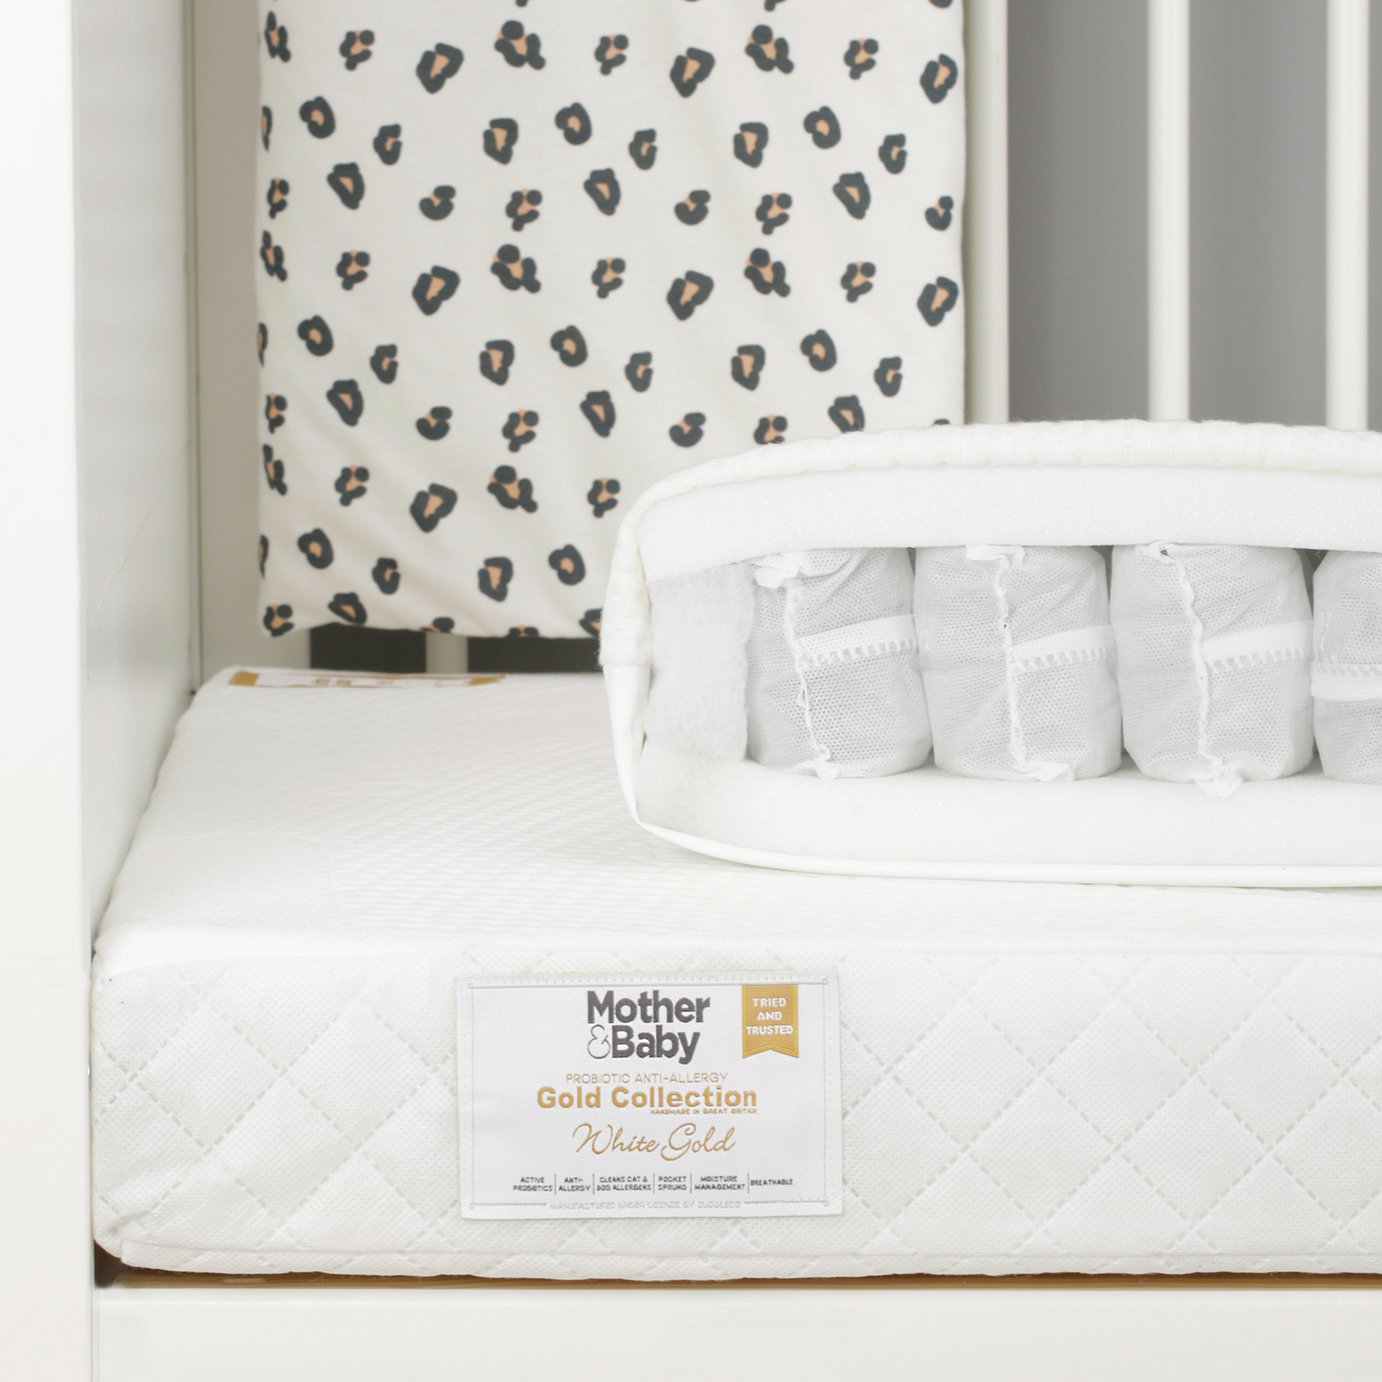 Mother&Baby 140 x 70cm Anti-Allergy Pocket Cot Bed Mattress